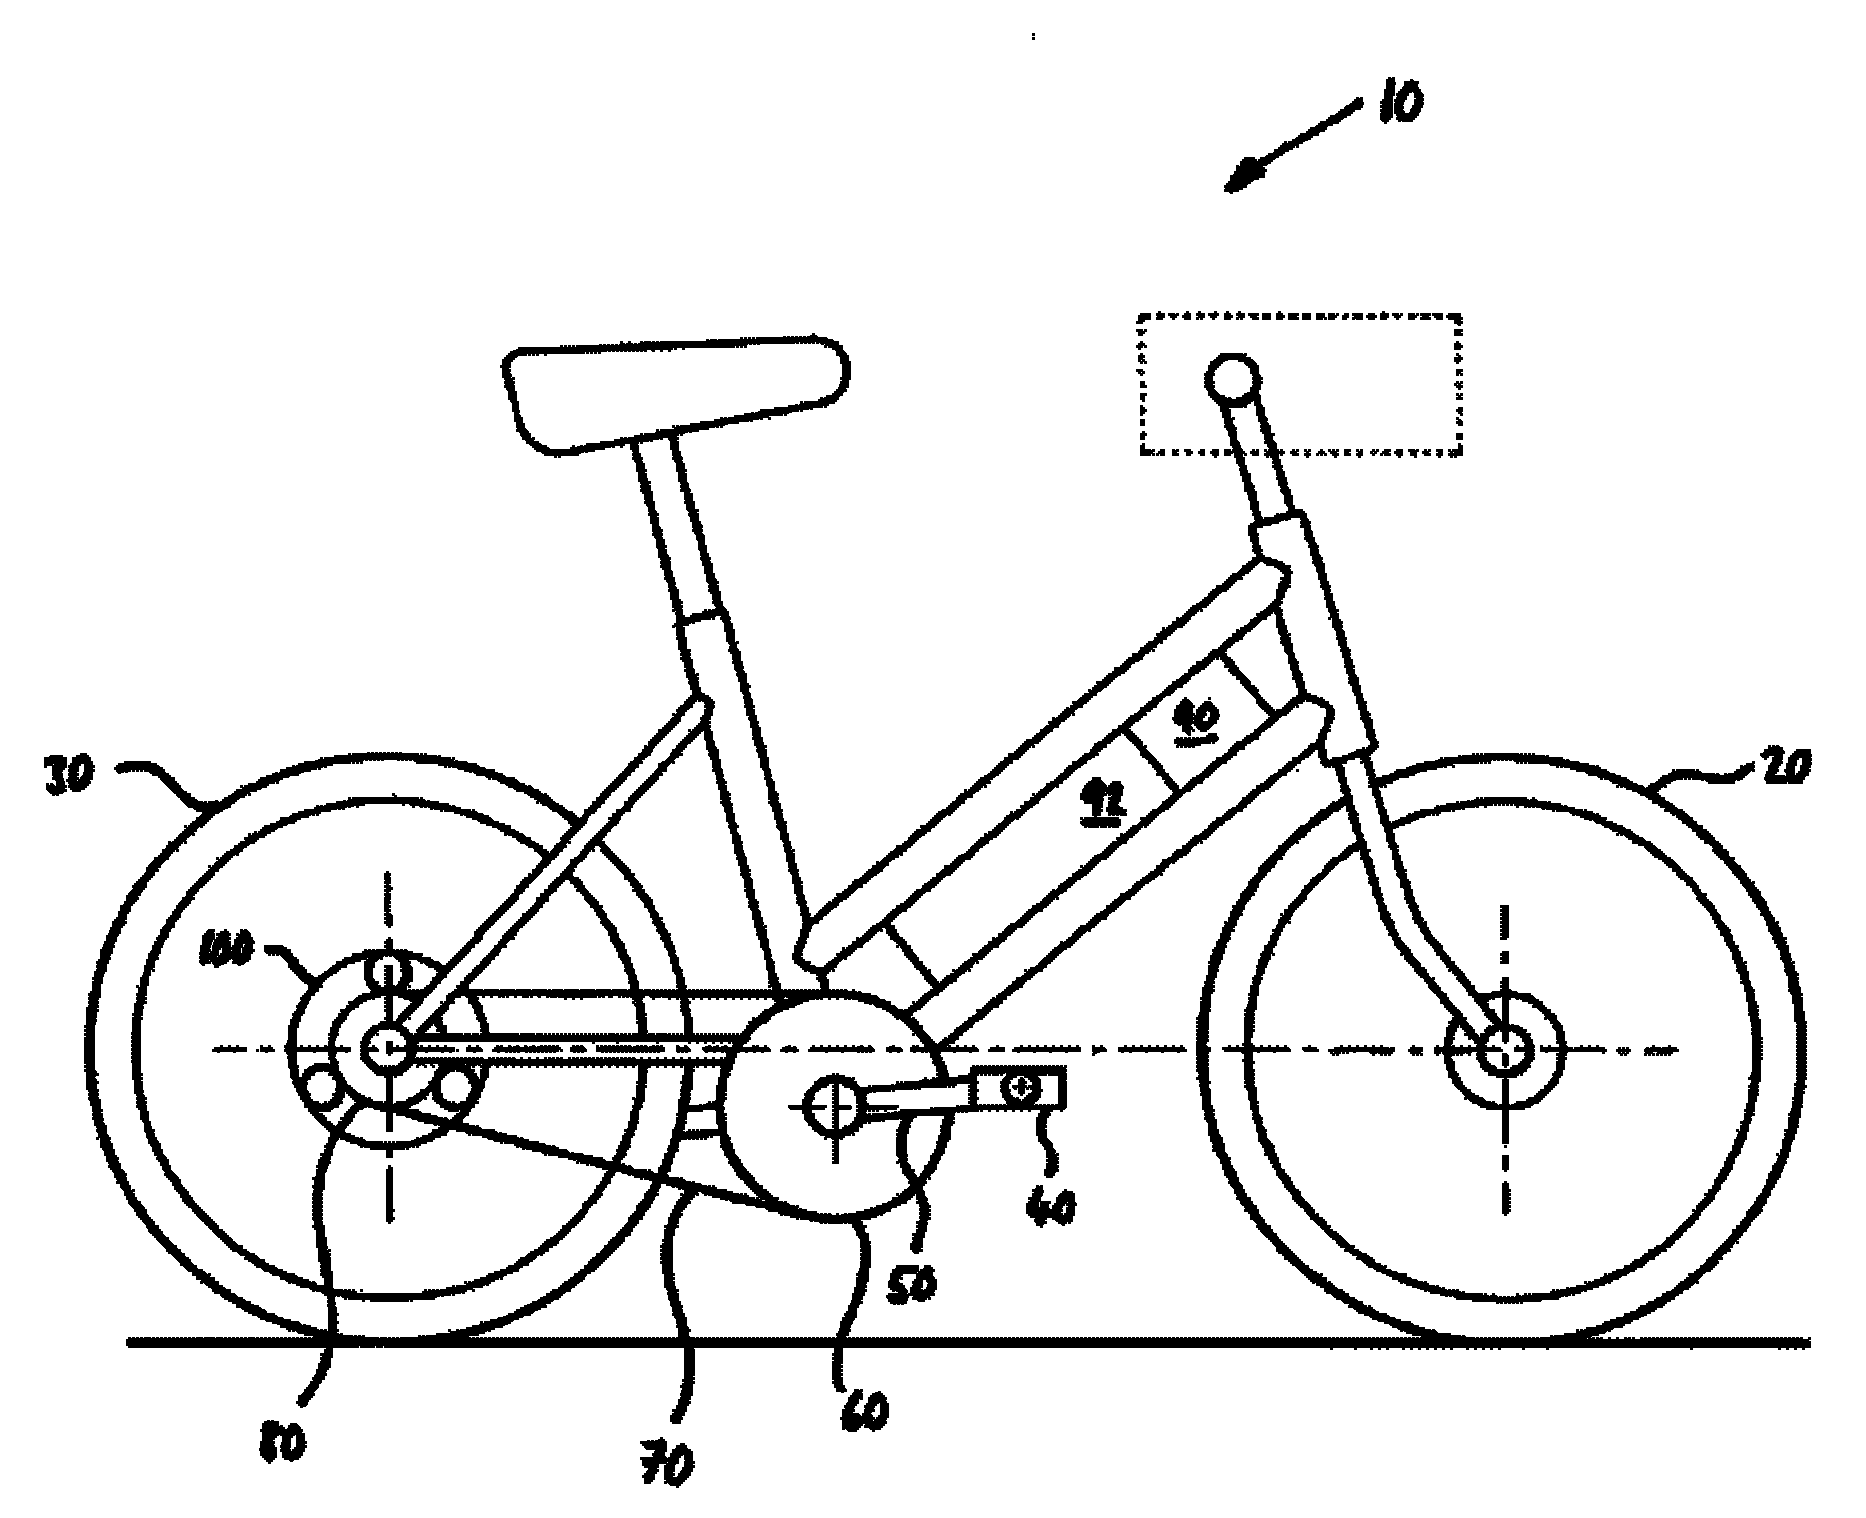 Bicycle transmission system